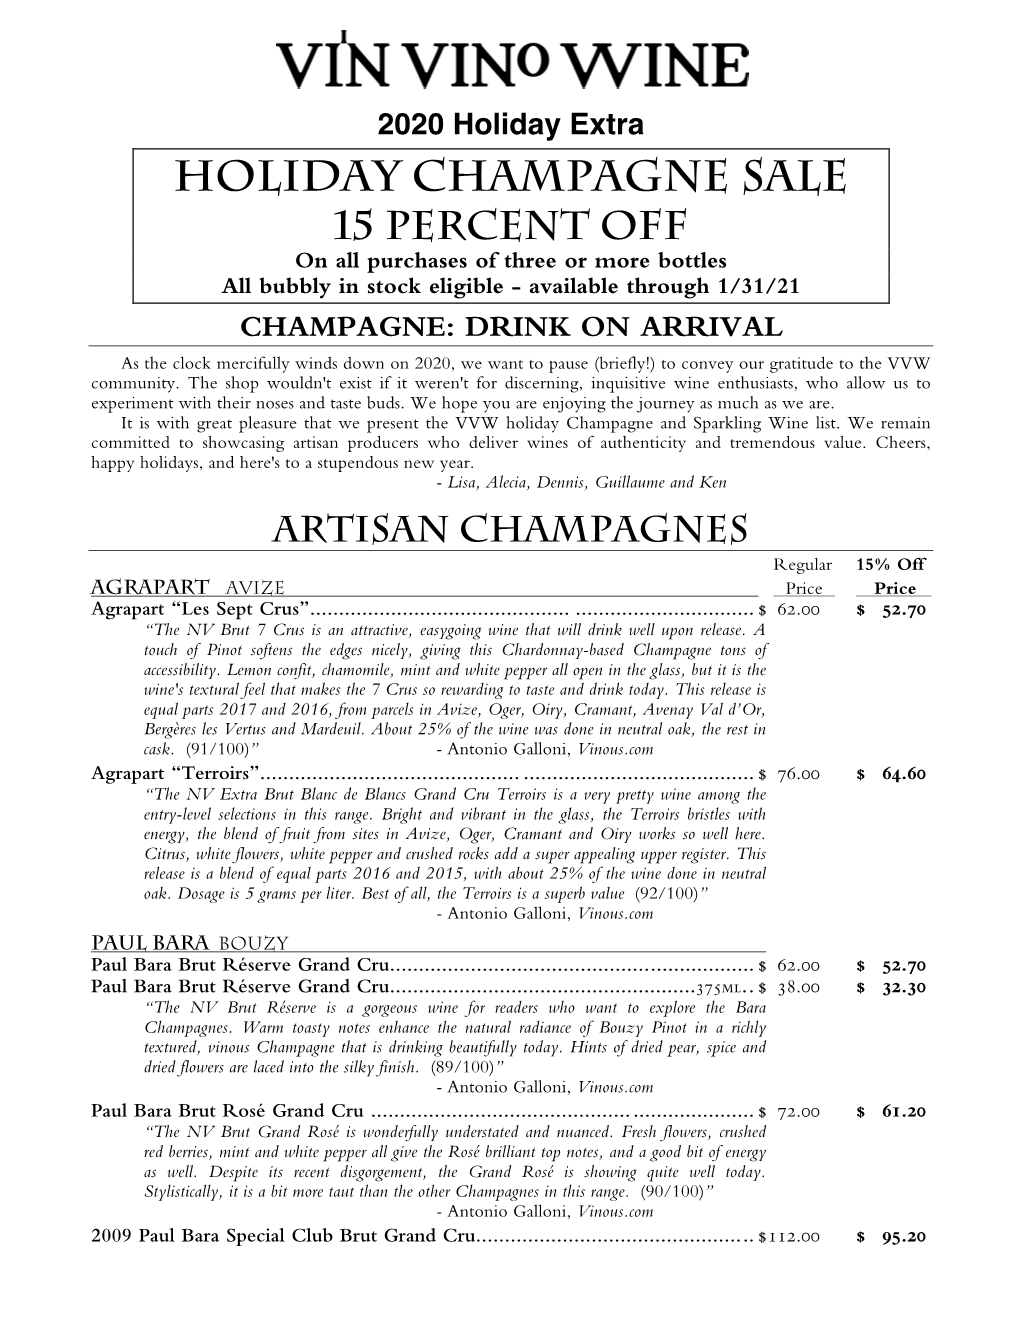 Holiday Champagne Sale 15 PERCENT OFF on All Purchases of Three Or More Bottles All Bubbly in Stock Eligible - Available Through 1/31/21